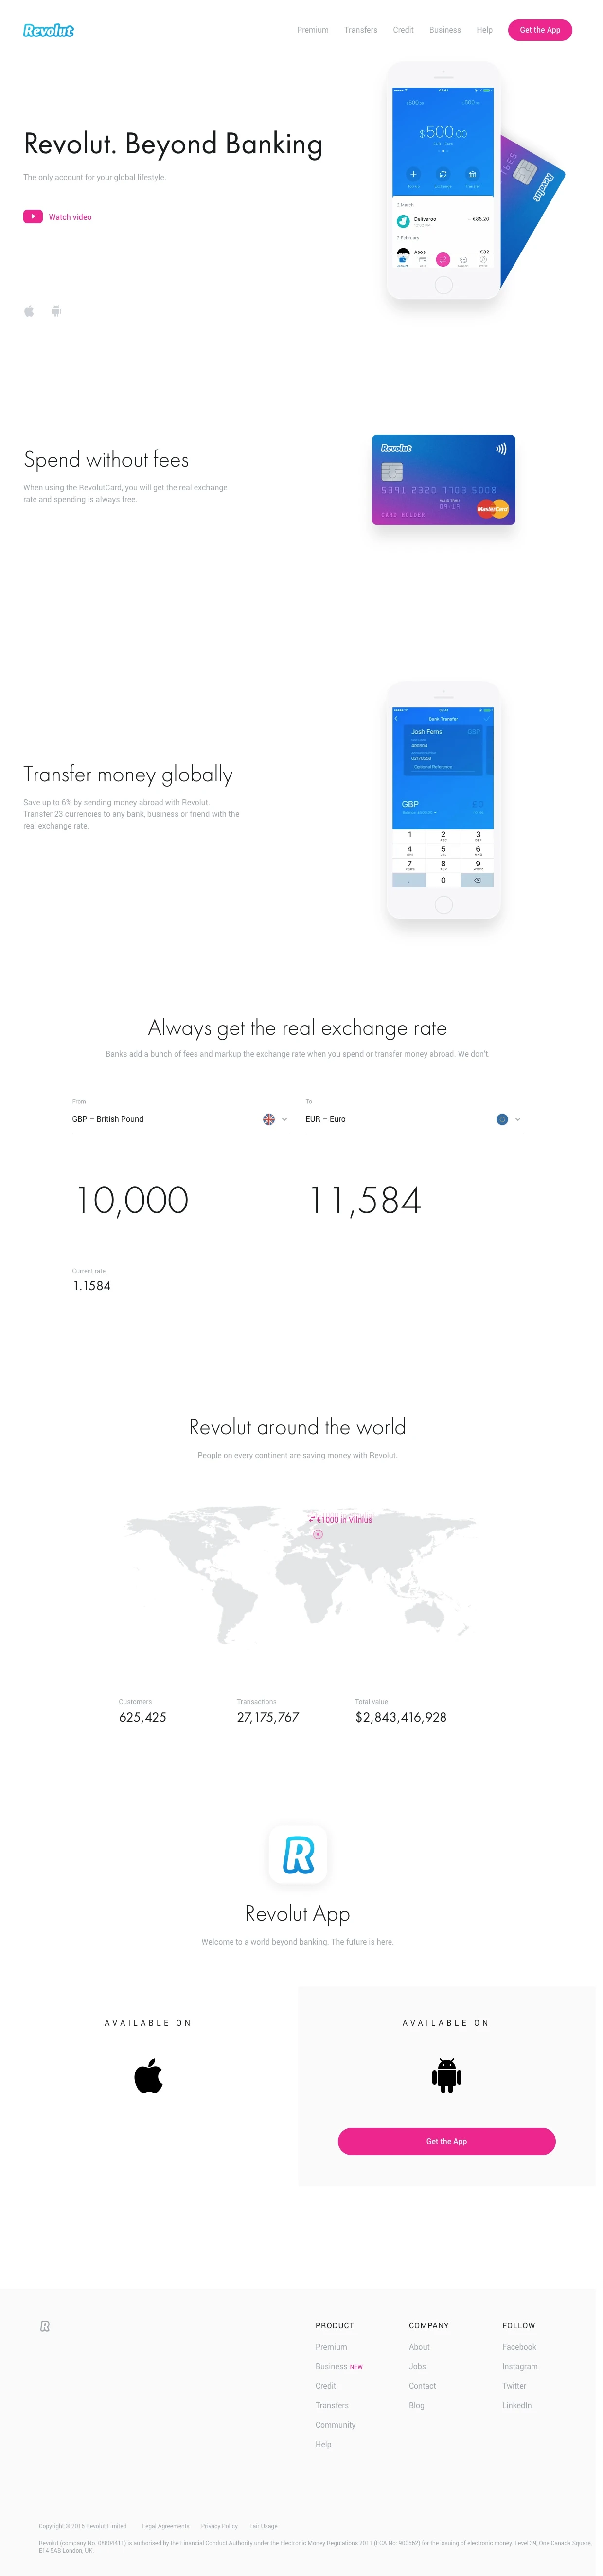 Revolut Landing Page Example: We’re building a 21st century banking alternative designed for your global lifestyle. It’s like having a local bank account wherever you are.